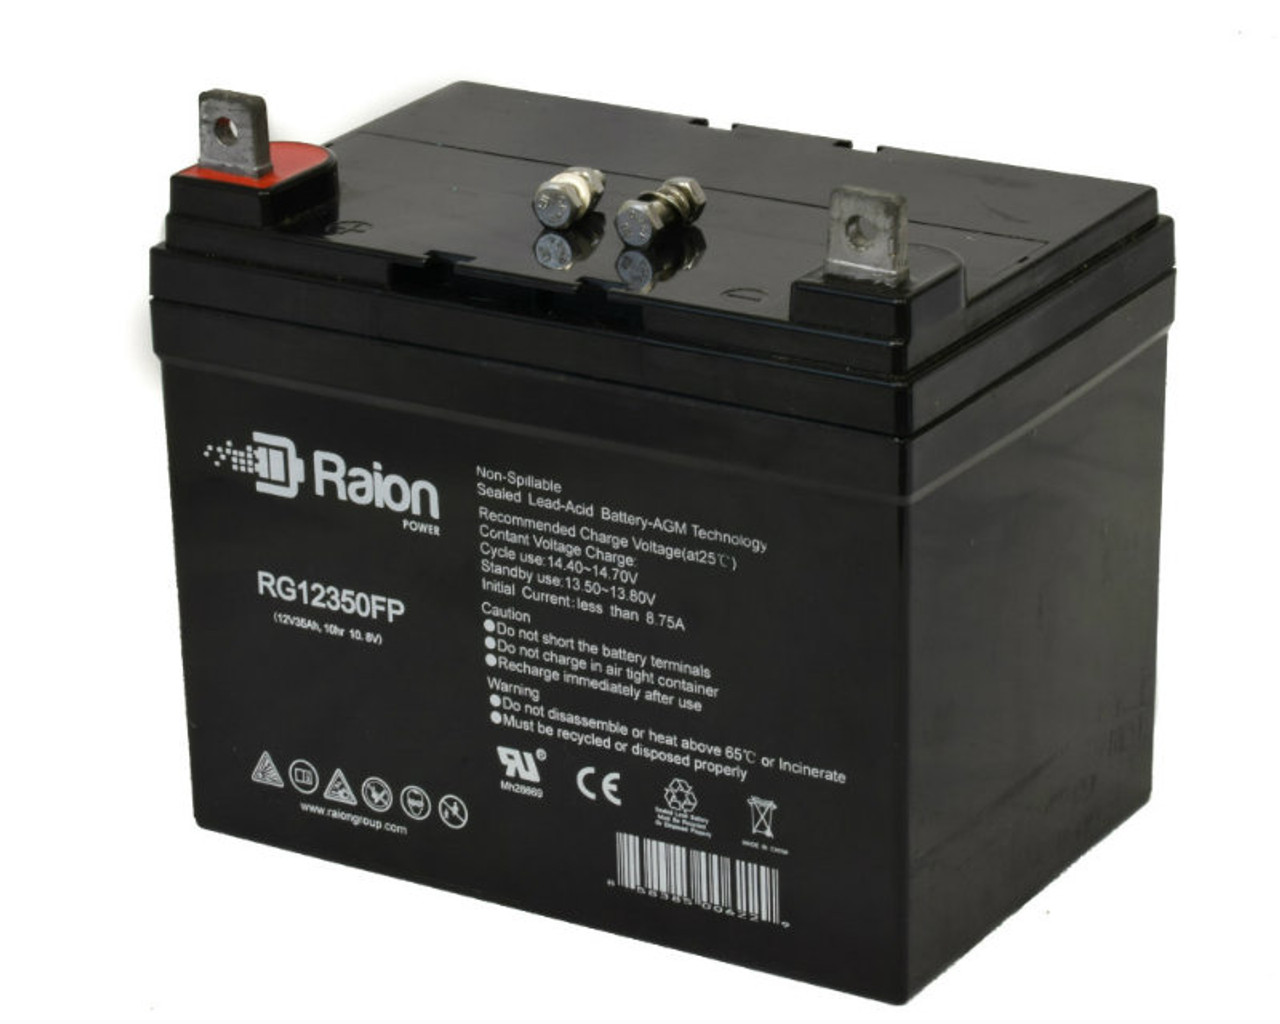 Raion Power Replacement 12V 35Ah RG12350FP Mobility Scooter Battery for Bruno PWC 2300/2210